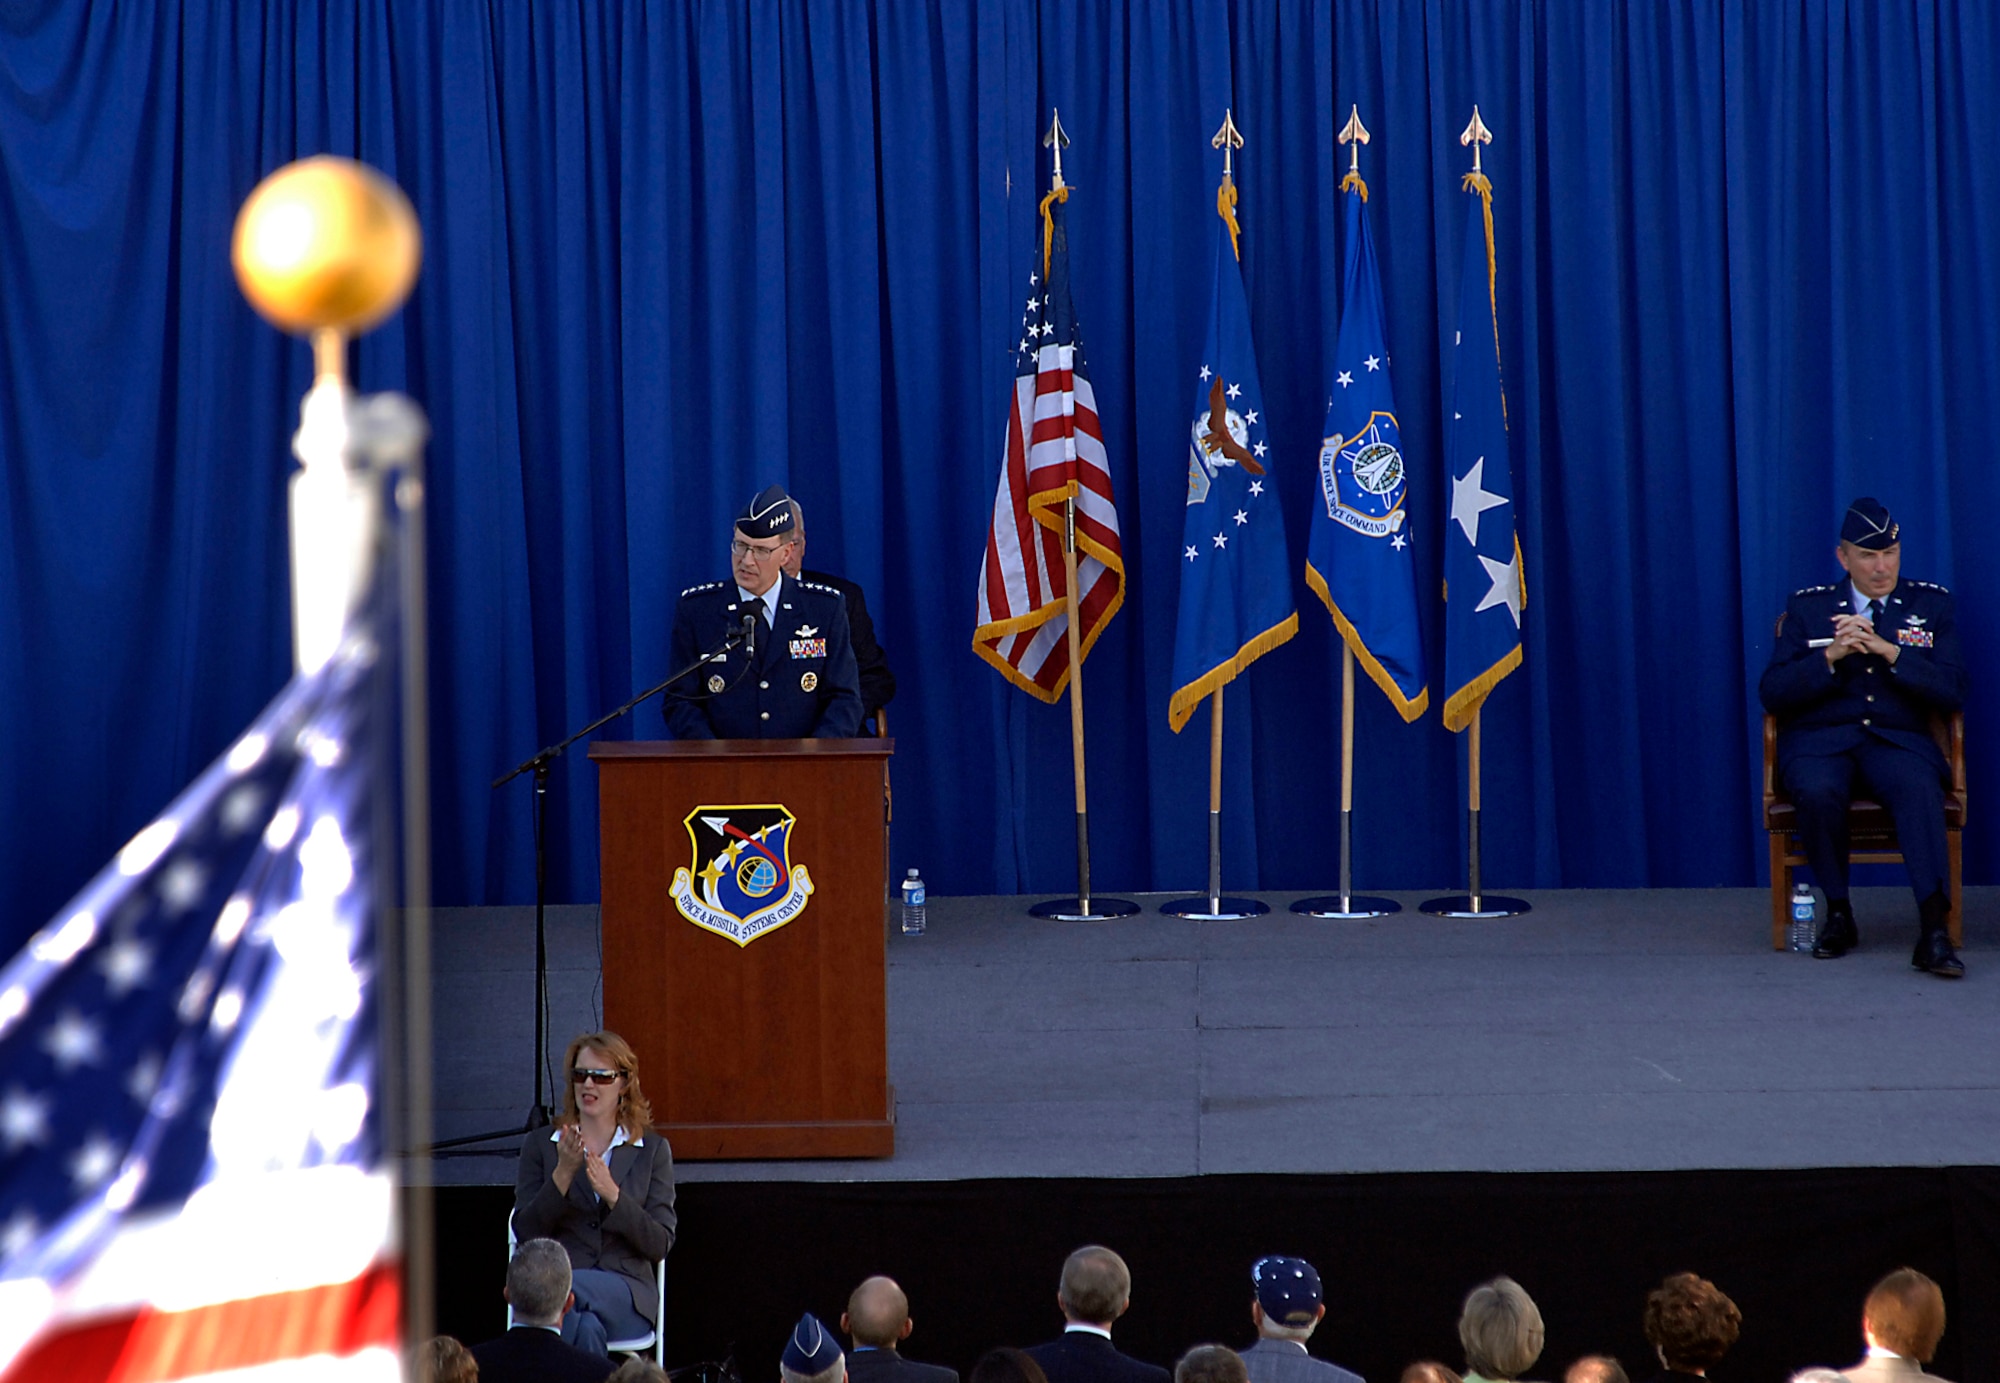 Gen. C. Robert Kehler, Air Force Space Command commander, spoke at a ceremony to dedicate a statue of the late General Bernard A. Schriever at Los Angeles AFB, Nov. 15.  General Schriever is considered the father of the Air Force’s space and missile program. The statue was donated to SMC by the Air Force Association’s Schriever Chapter. (Photo by Joe Juarez)